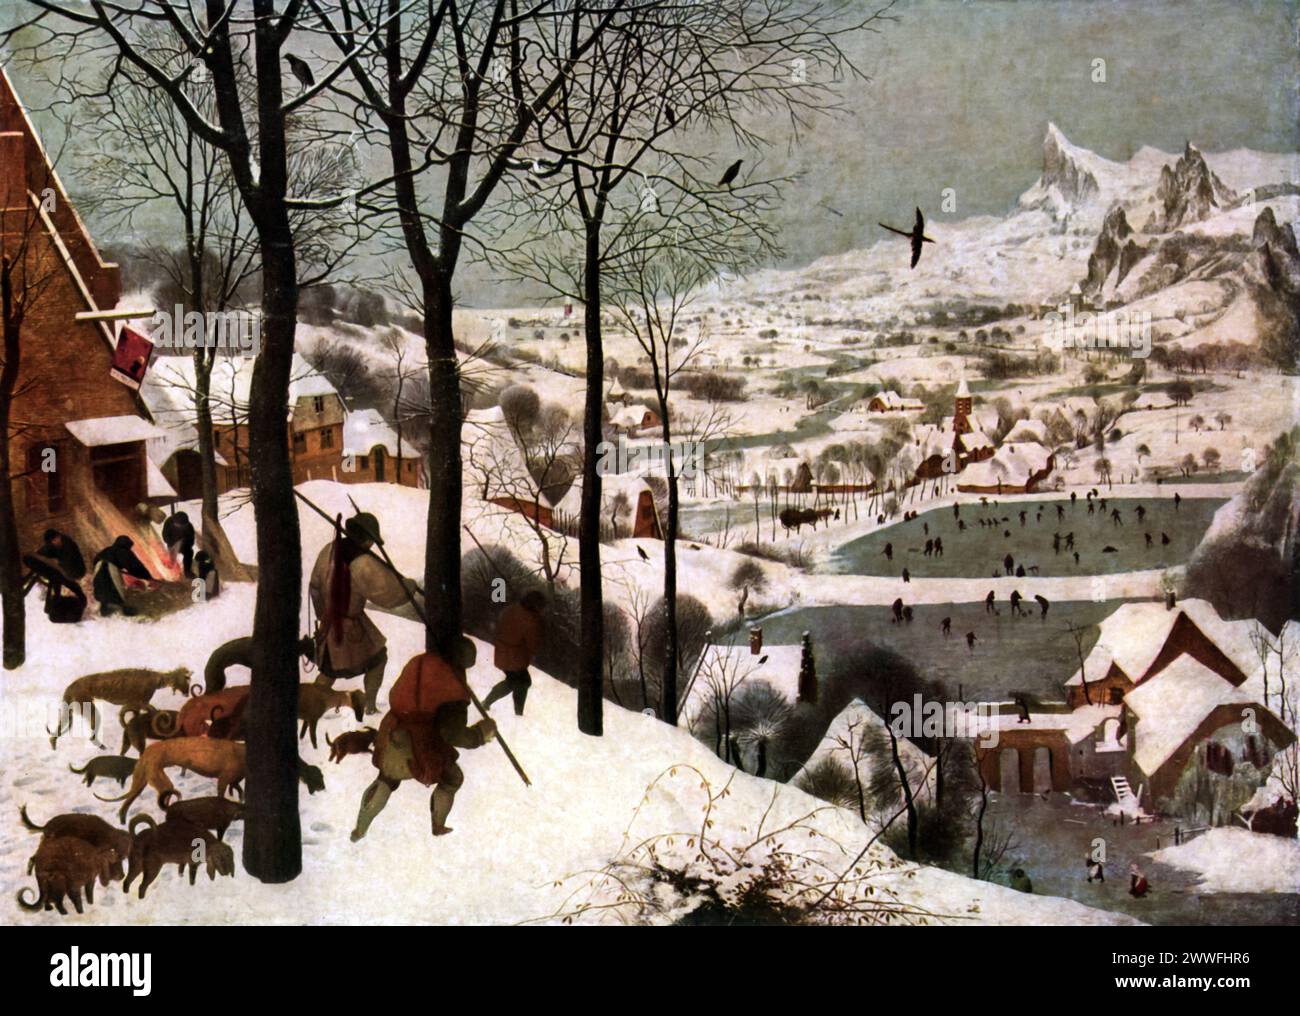 Pieter Brueghel the Elder's 'Hunters in the Snow' (circa 1565): Located in the Kunsthistorisches Museum, Vienna, this painting is a key work of the Renaissance, illustrating the shift towards detailed landscape and genre scenes. As part of Brueghel's series on the seasons, it vividly portrays winter life, blending human activity with a vast, natural setting. Stock Photo